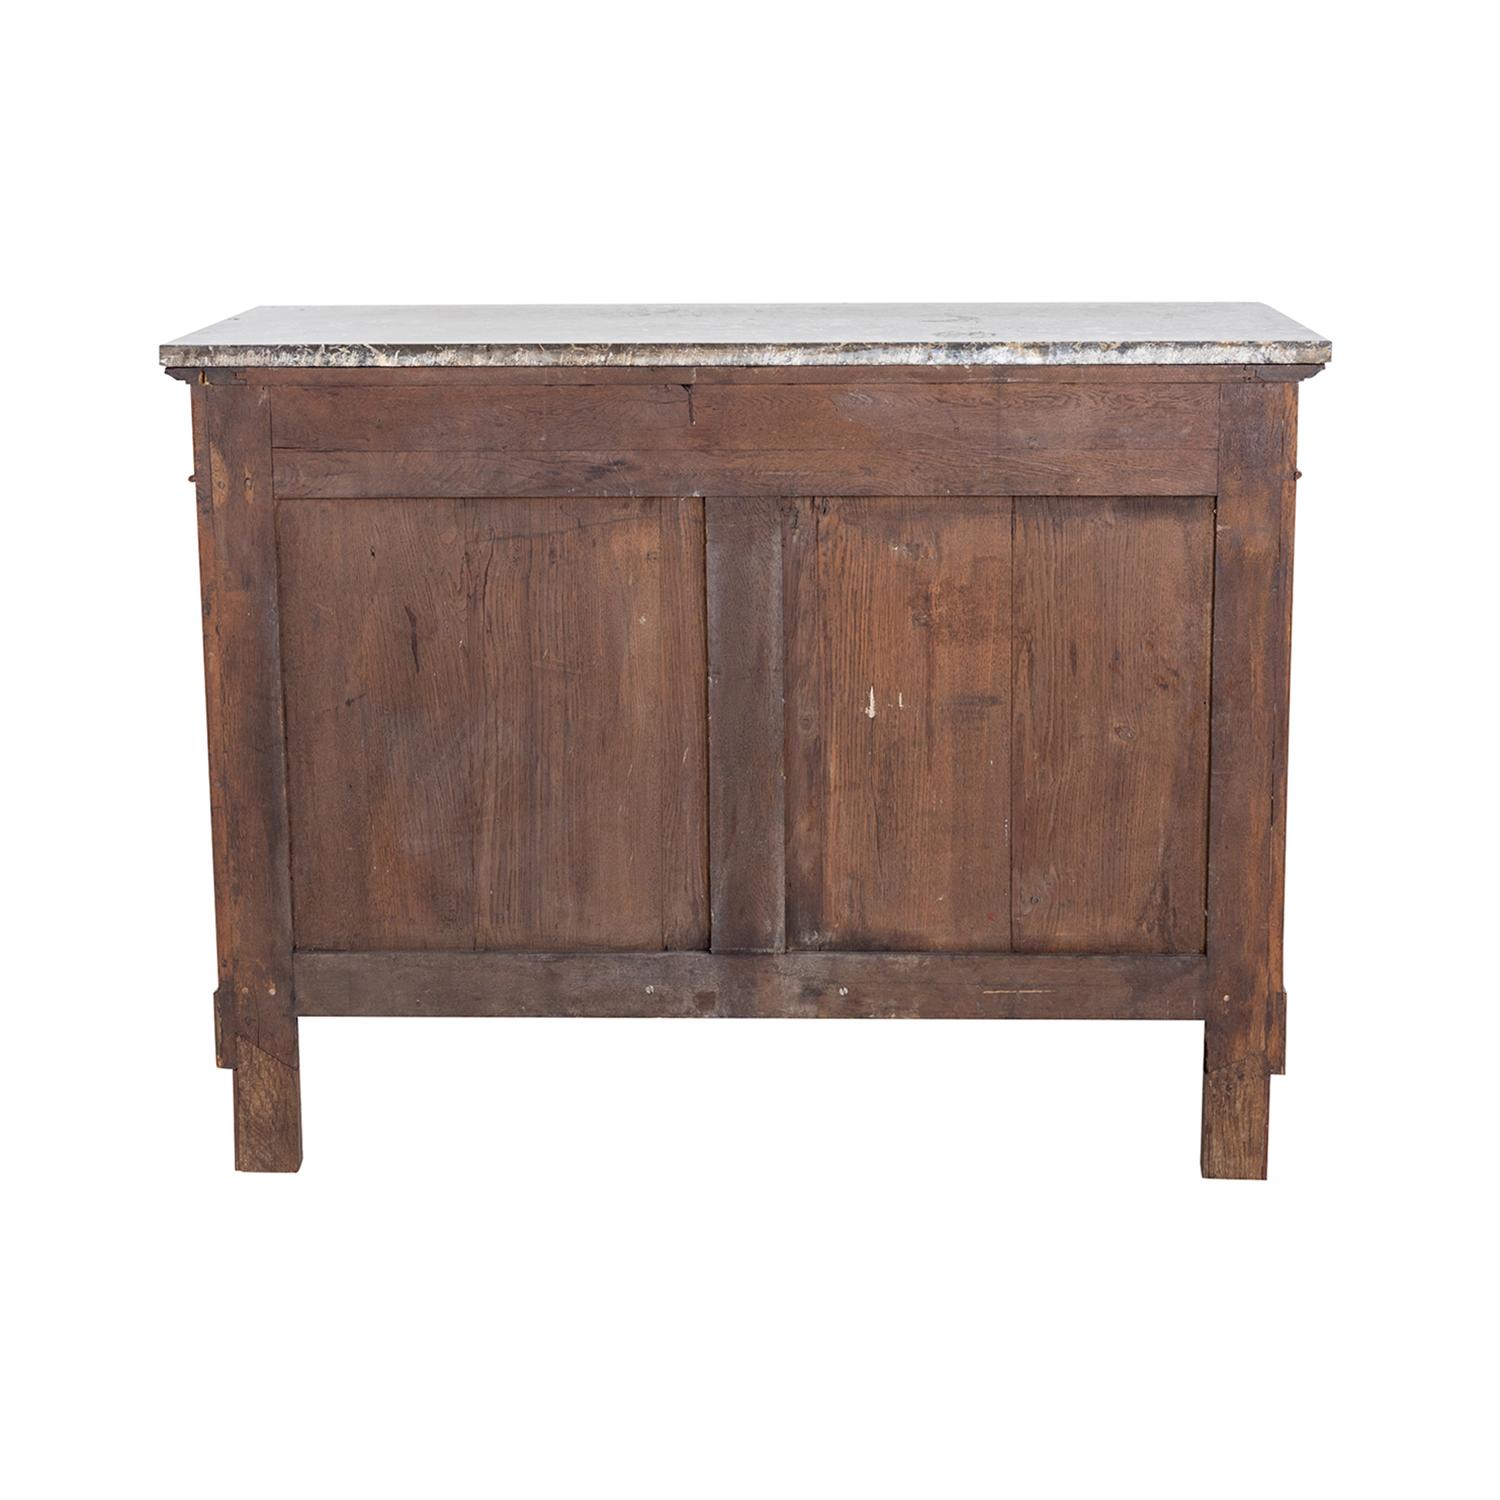 19th Century French Empire Antique Mahogany, Marble Chest of Drawers For Sale 4